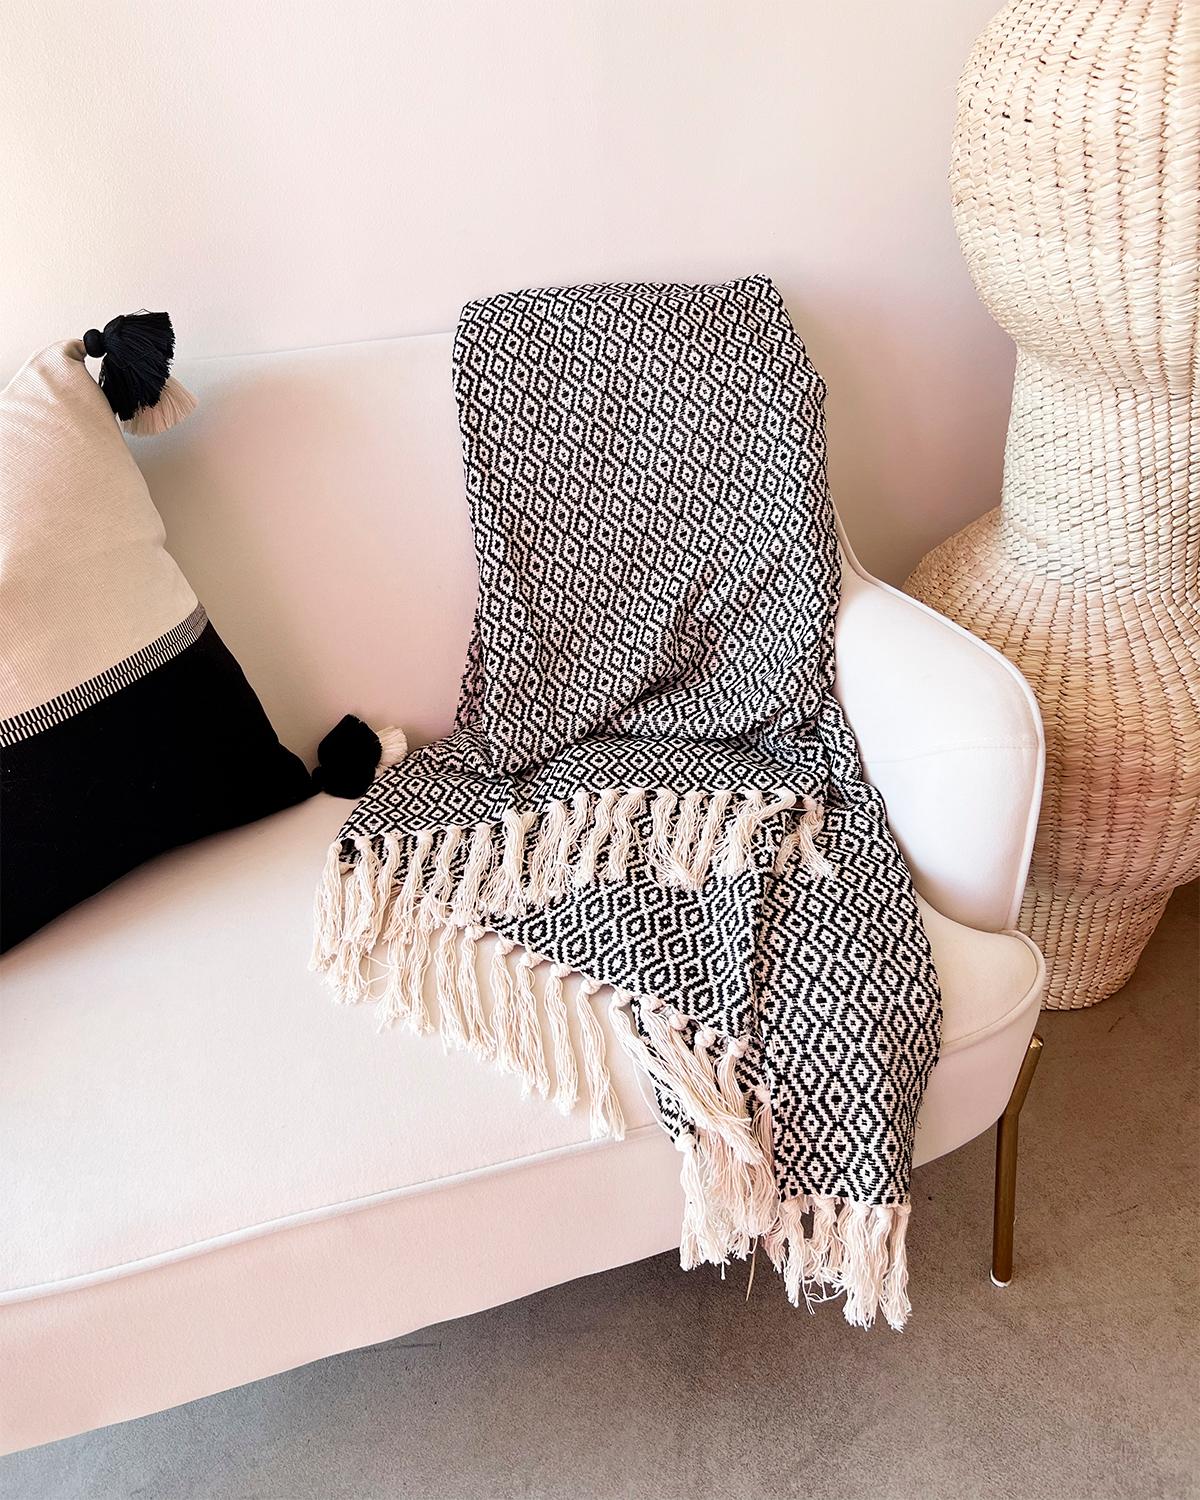 Soft, natural 100% cotton throw made in one of the mother countries, Portugal. This lovely throw gets softer and softer by the minute and is warm enough for colder temperatures yet light enough to be used year round. 

Also available in natural and